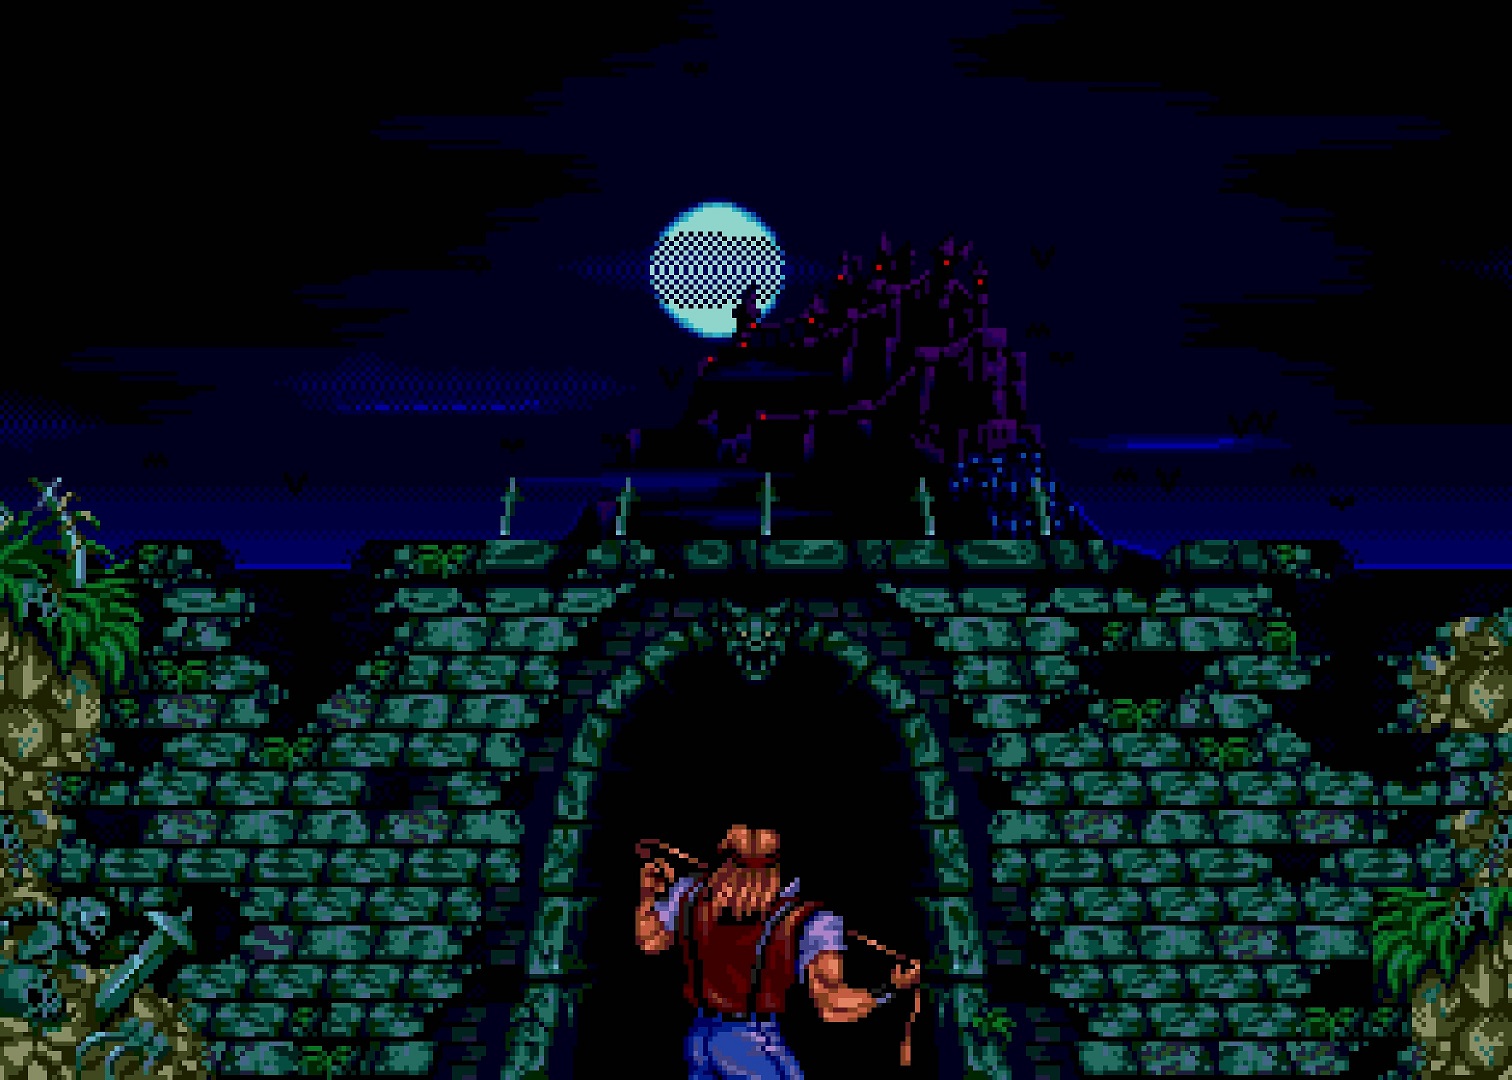 castlevania:-bloodlines-for-genesis-pits-fashion-disasters-against-…-–-destructoid